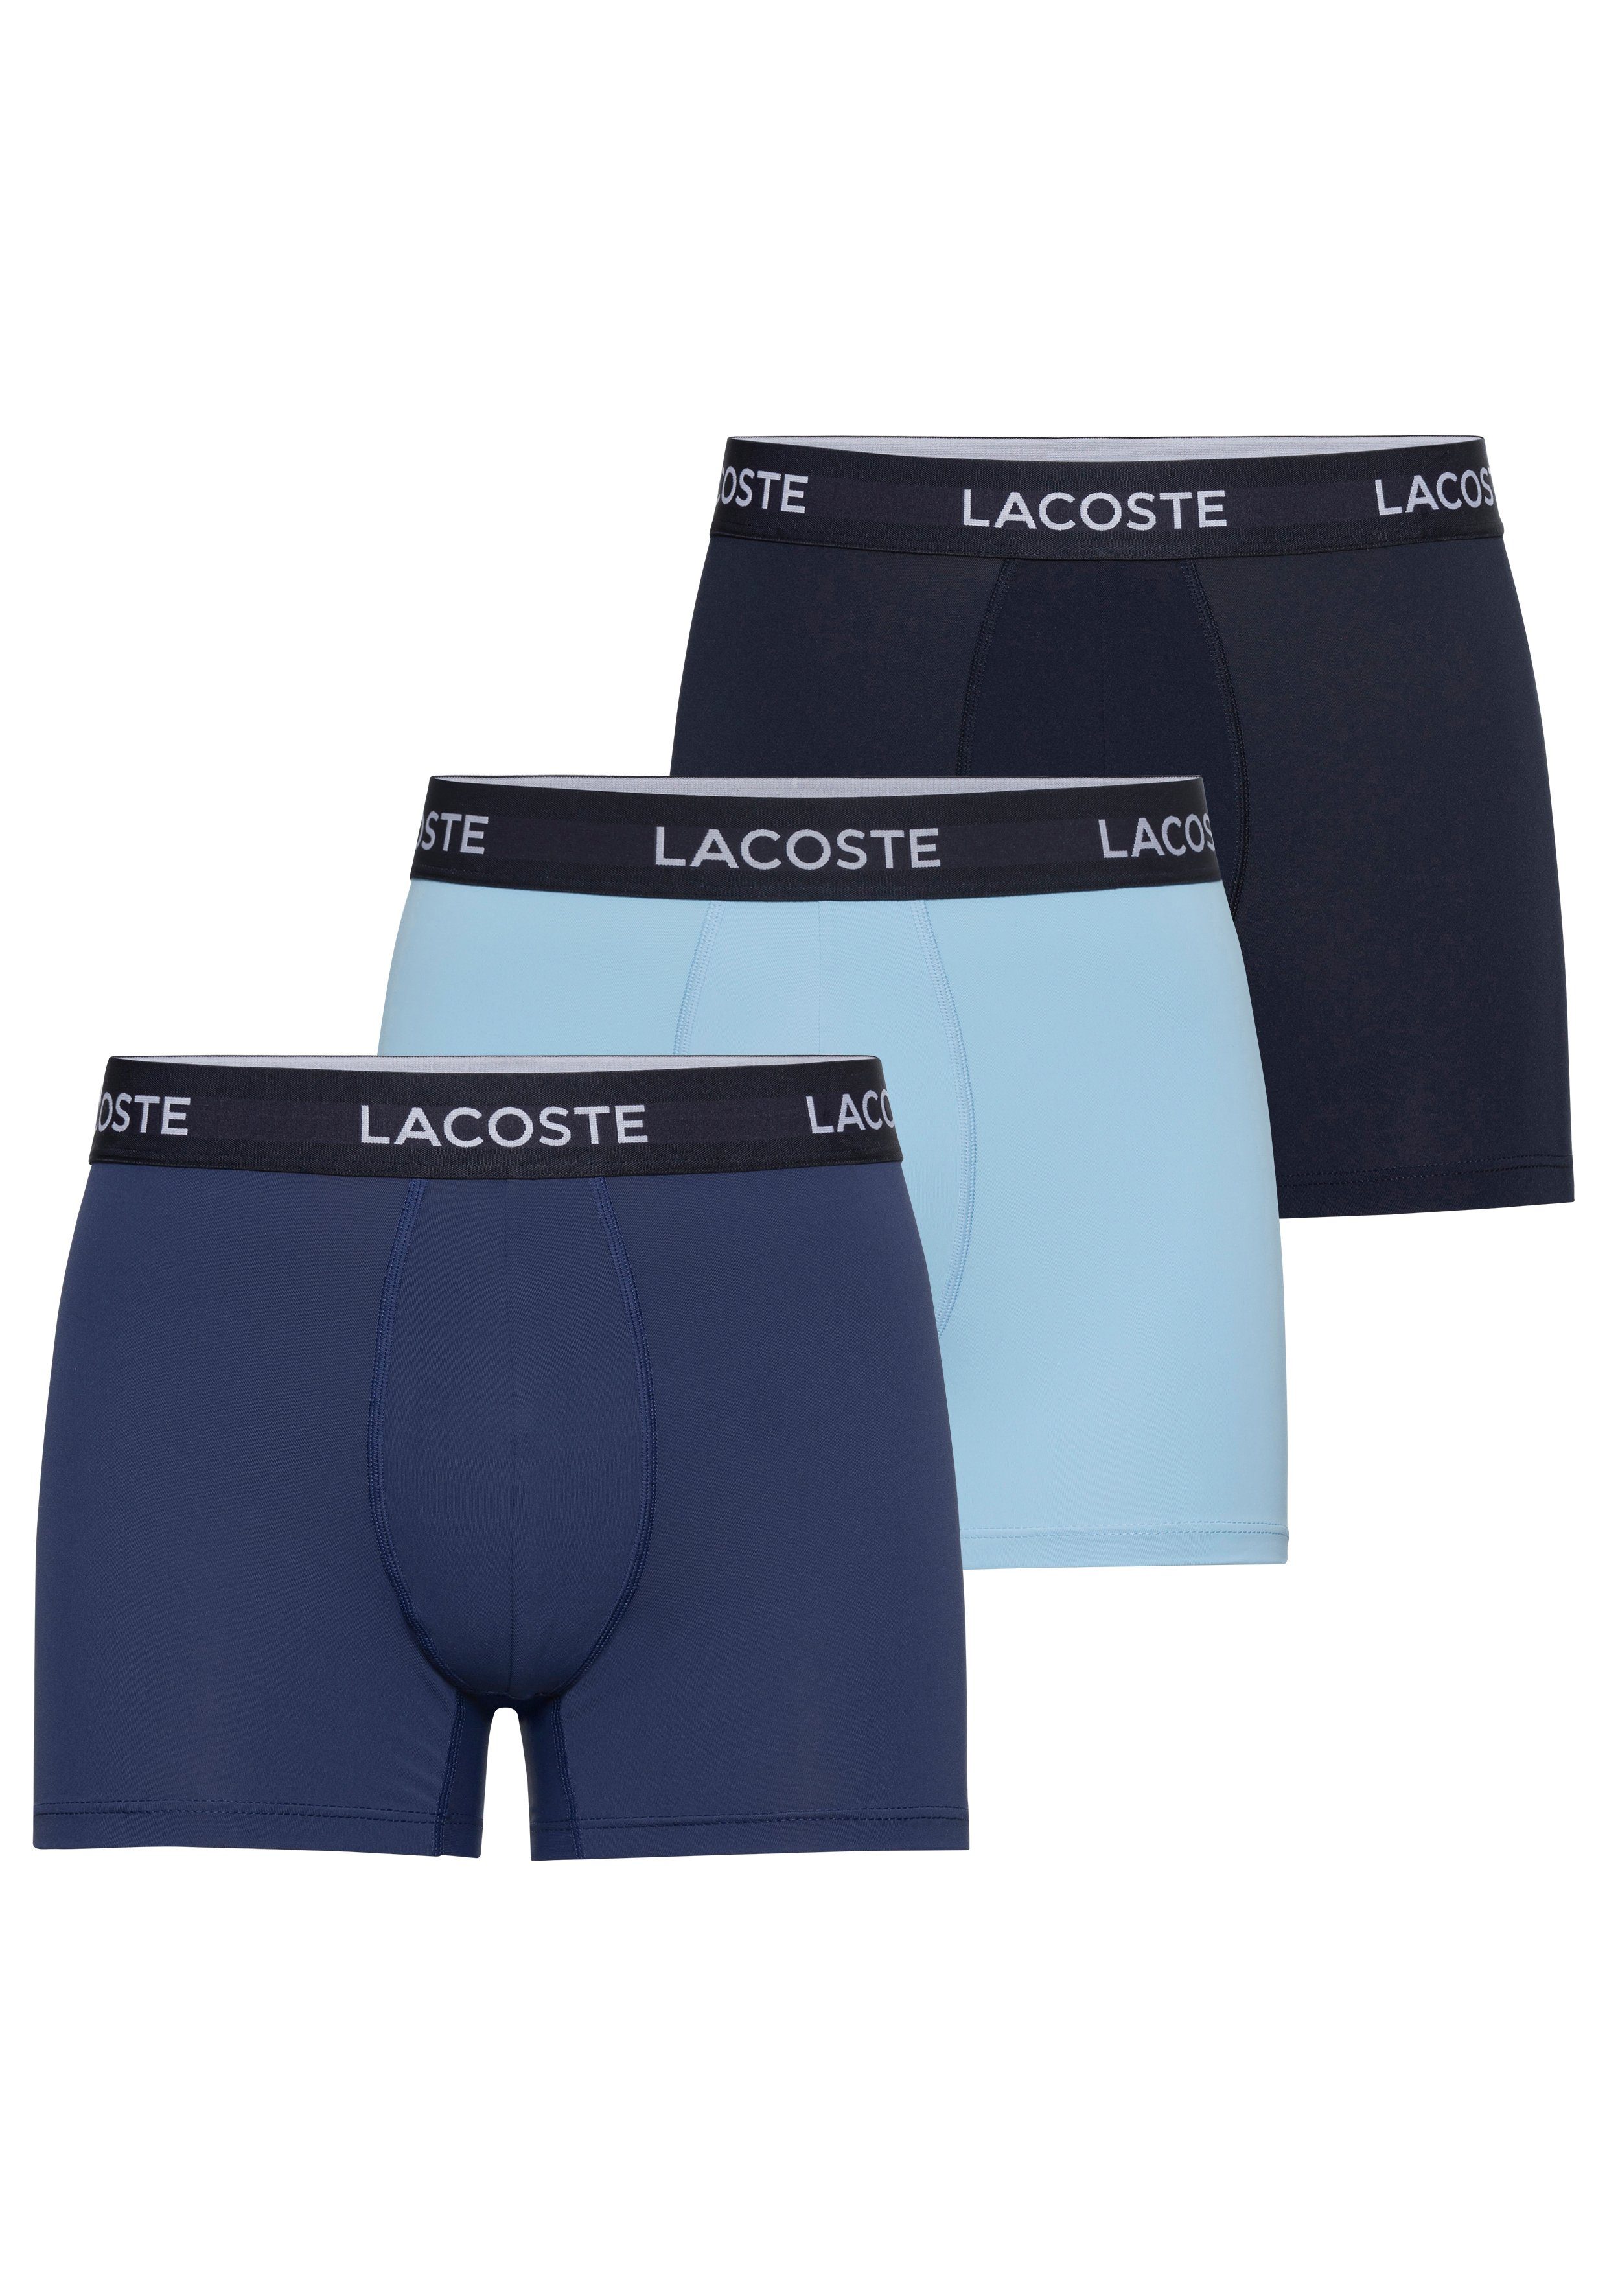 Lacoste Boxer (Packung, 3-St) VUC navy / blue / light blue